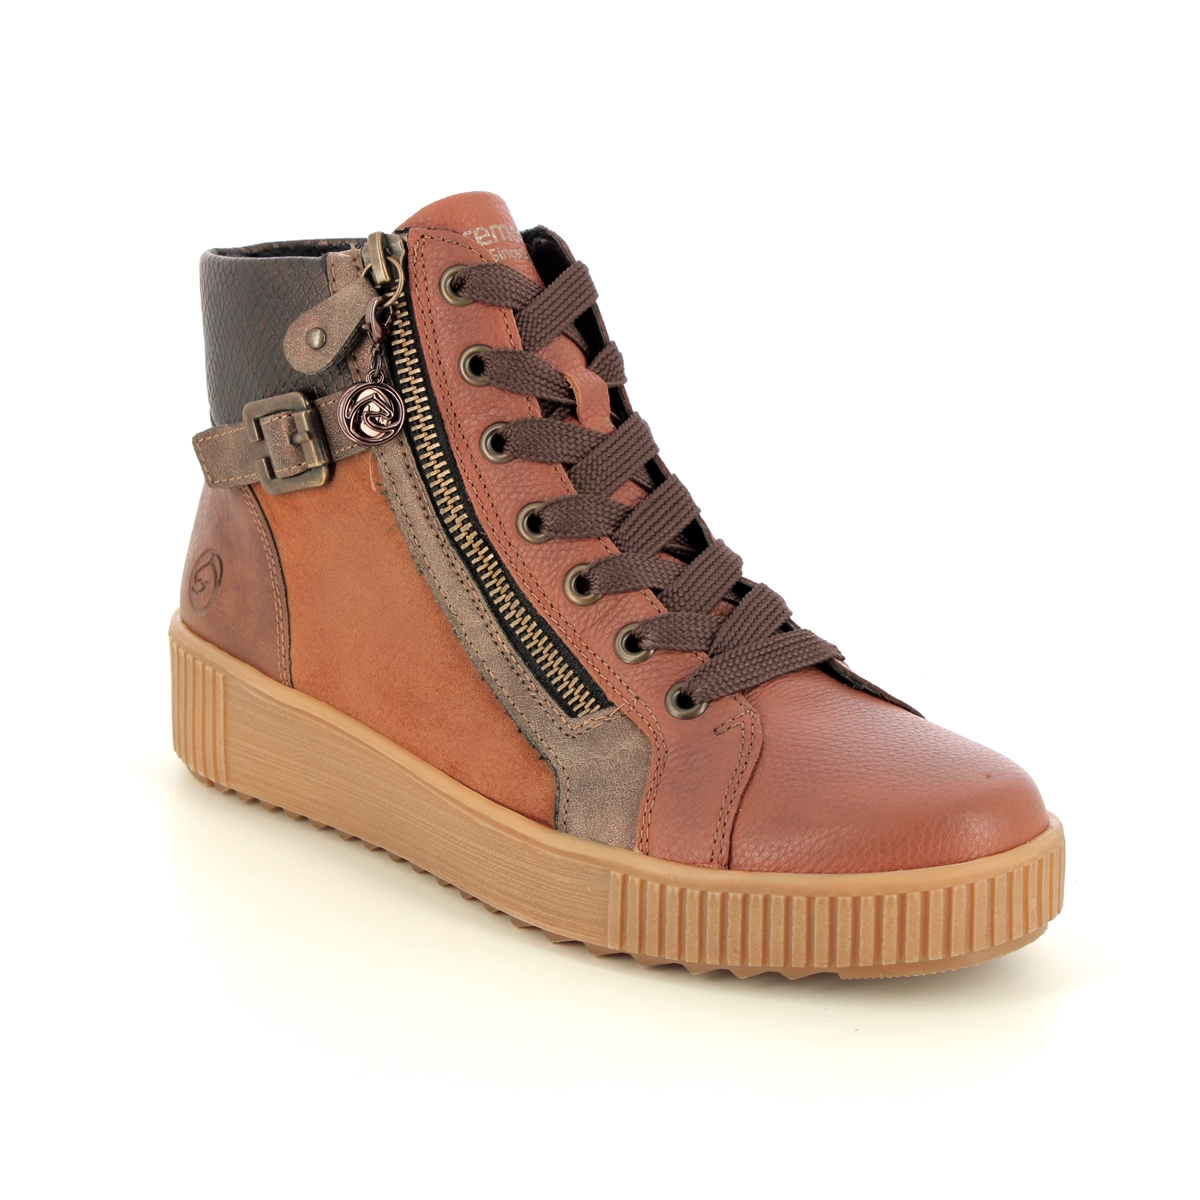 Remonte Durlozip Elle Tan Leather Womens Hi Tops R7997-24 In Size 36 In Plain Tan Leather